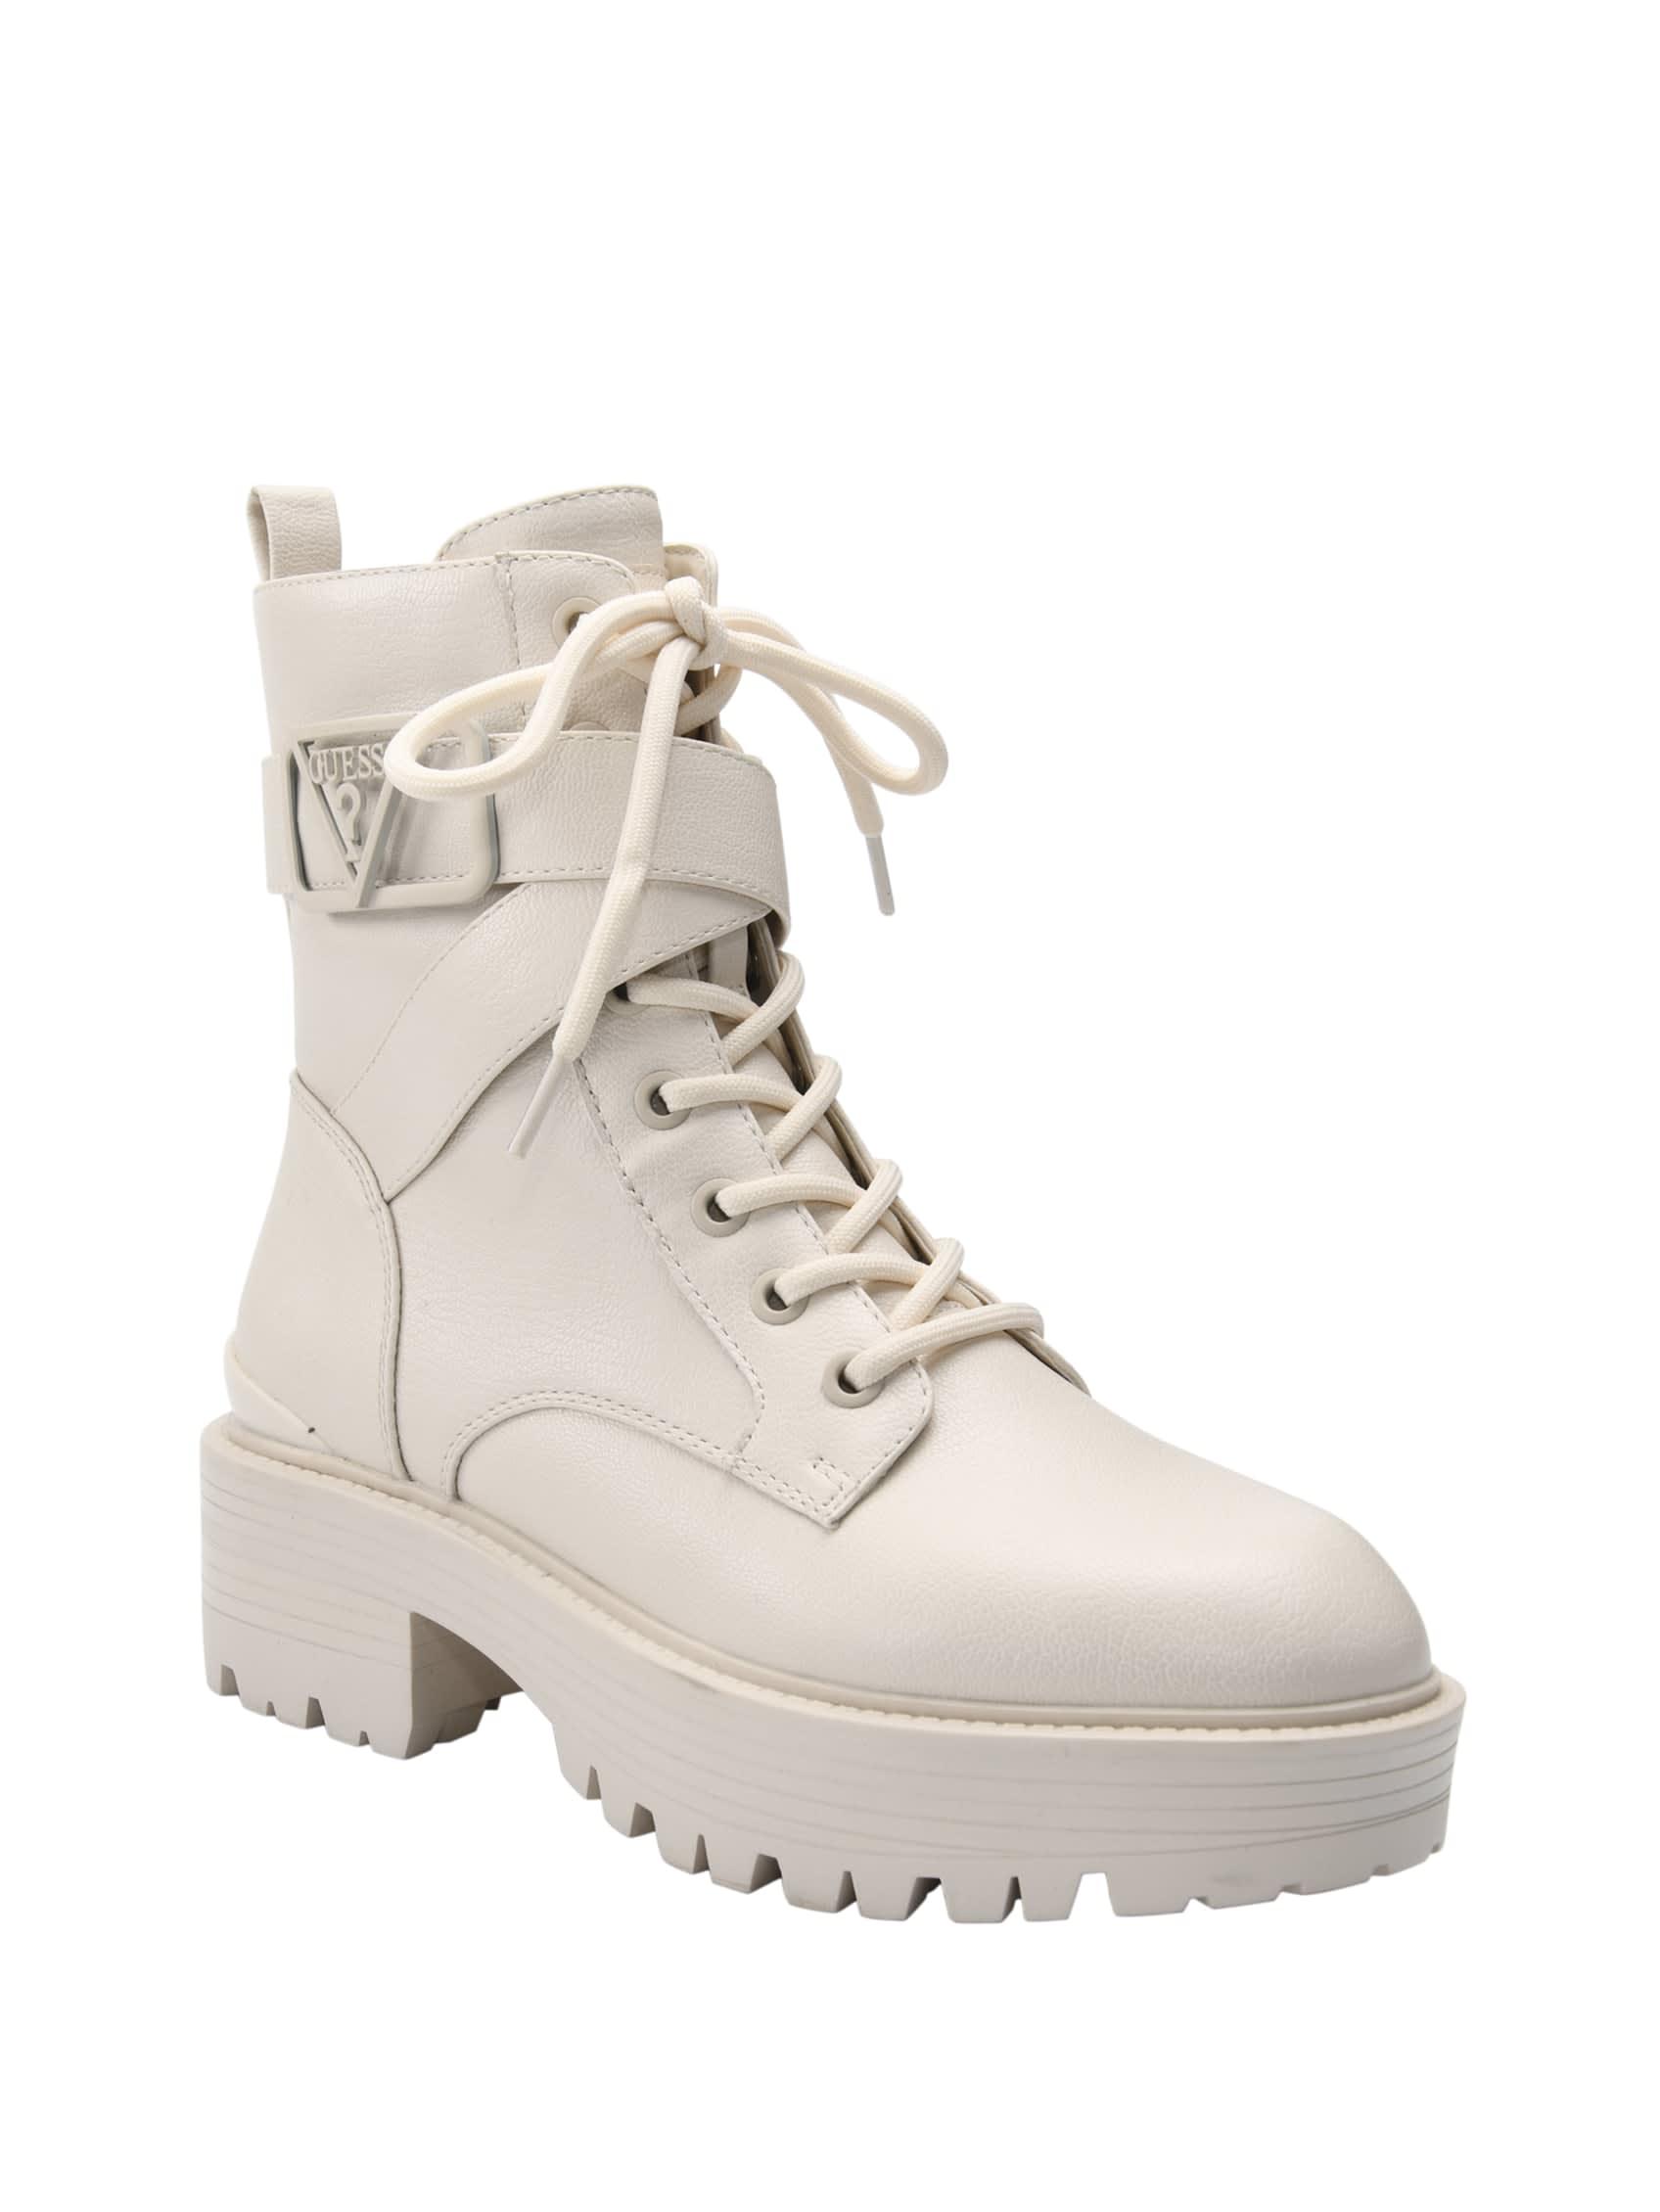 Guess Factory Flat Combat Booties in White | Lyst